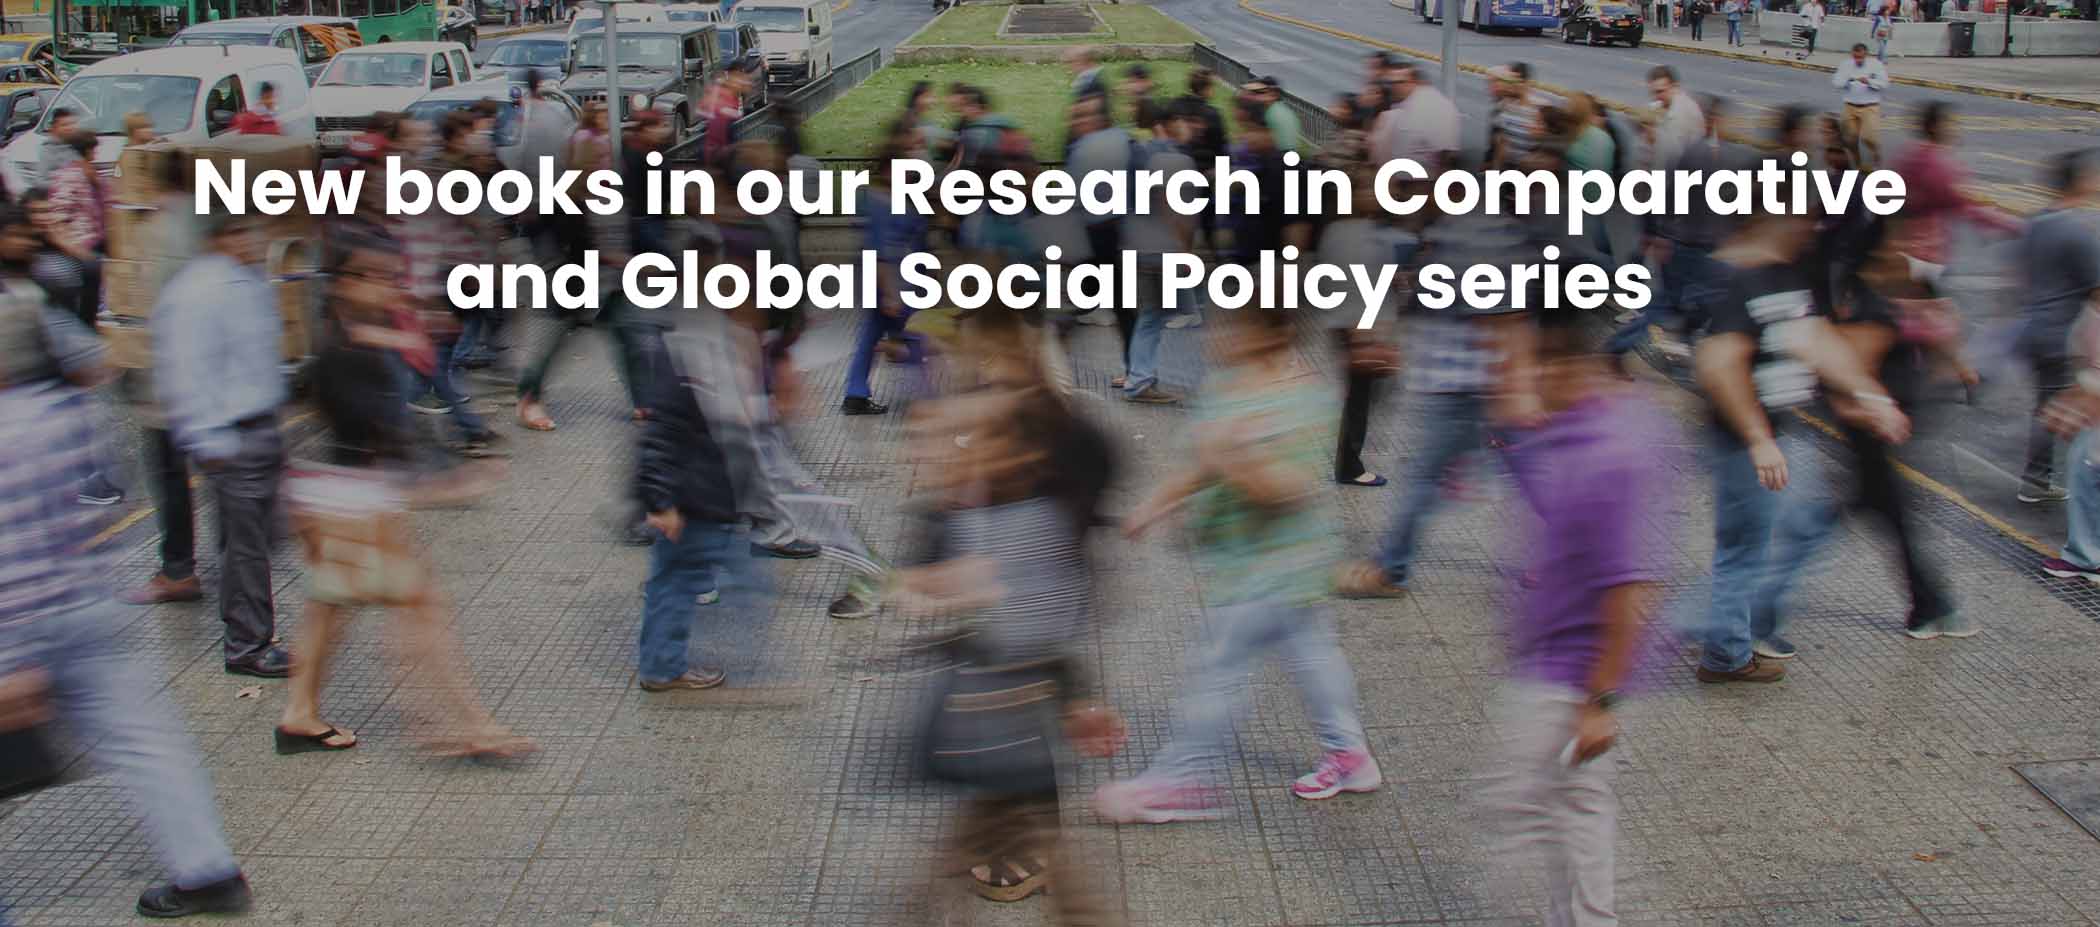 Research-in-comparative-and-global-social-policy.1.jpg